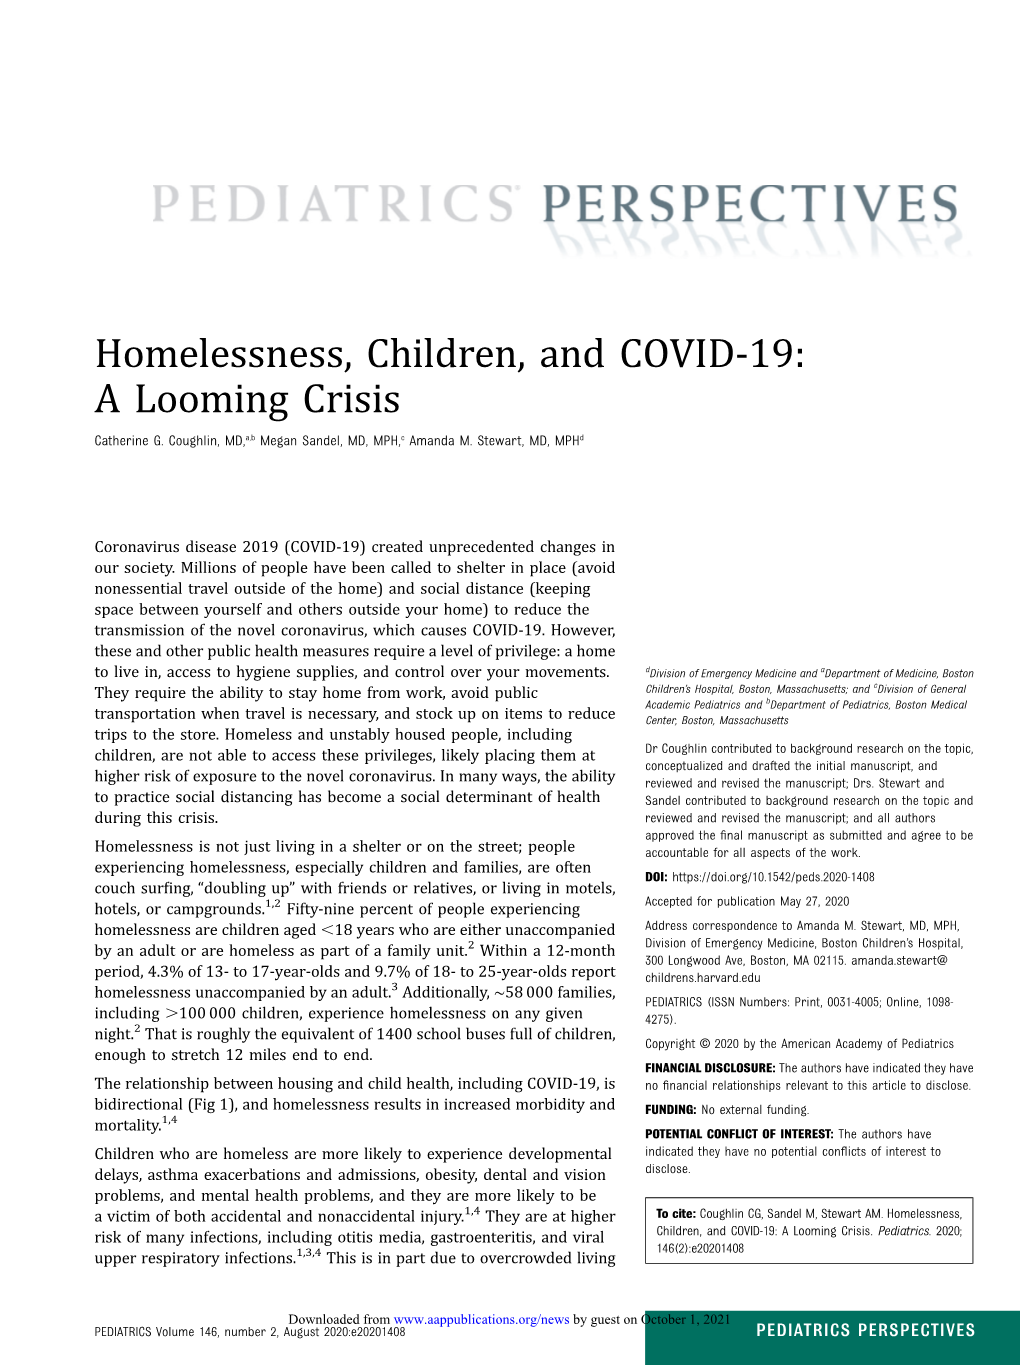 Homelessness, Children, and COVID-19: a Looming Crisis Catherine G